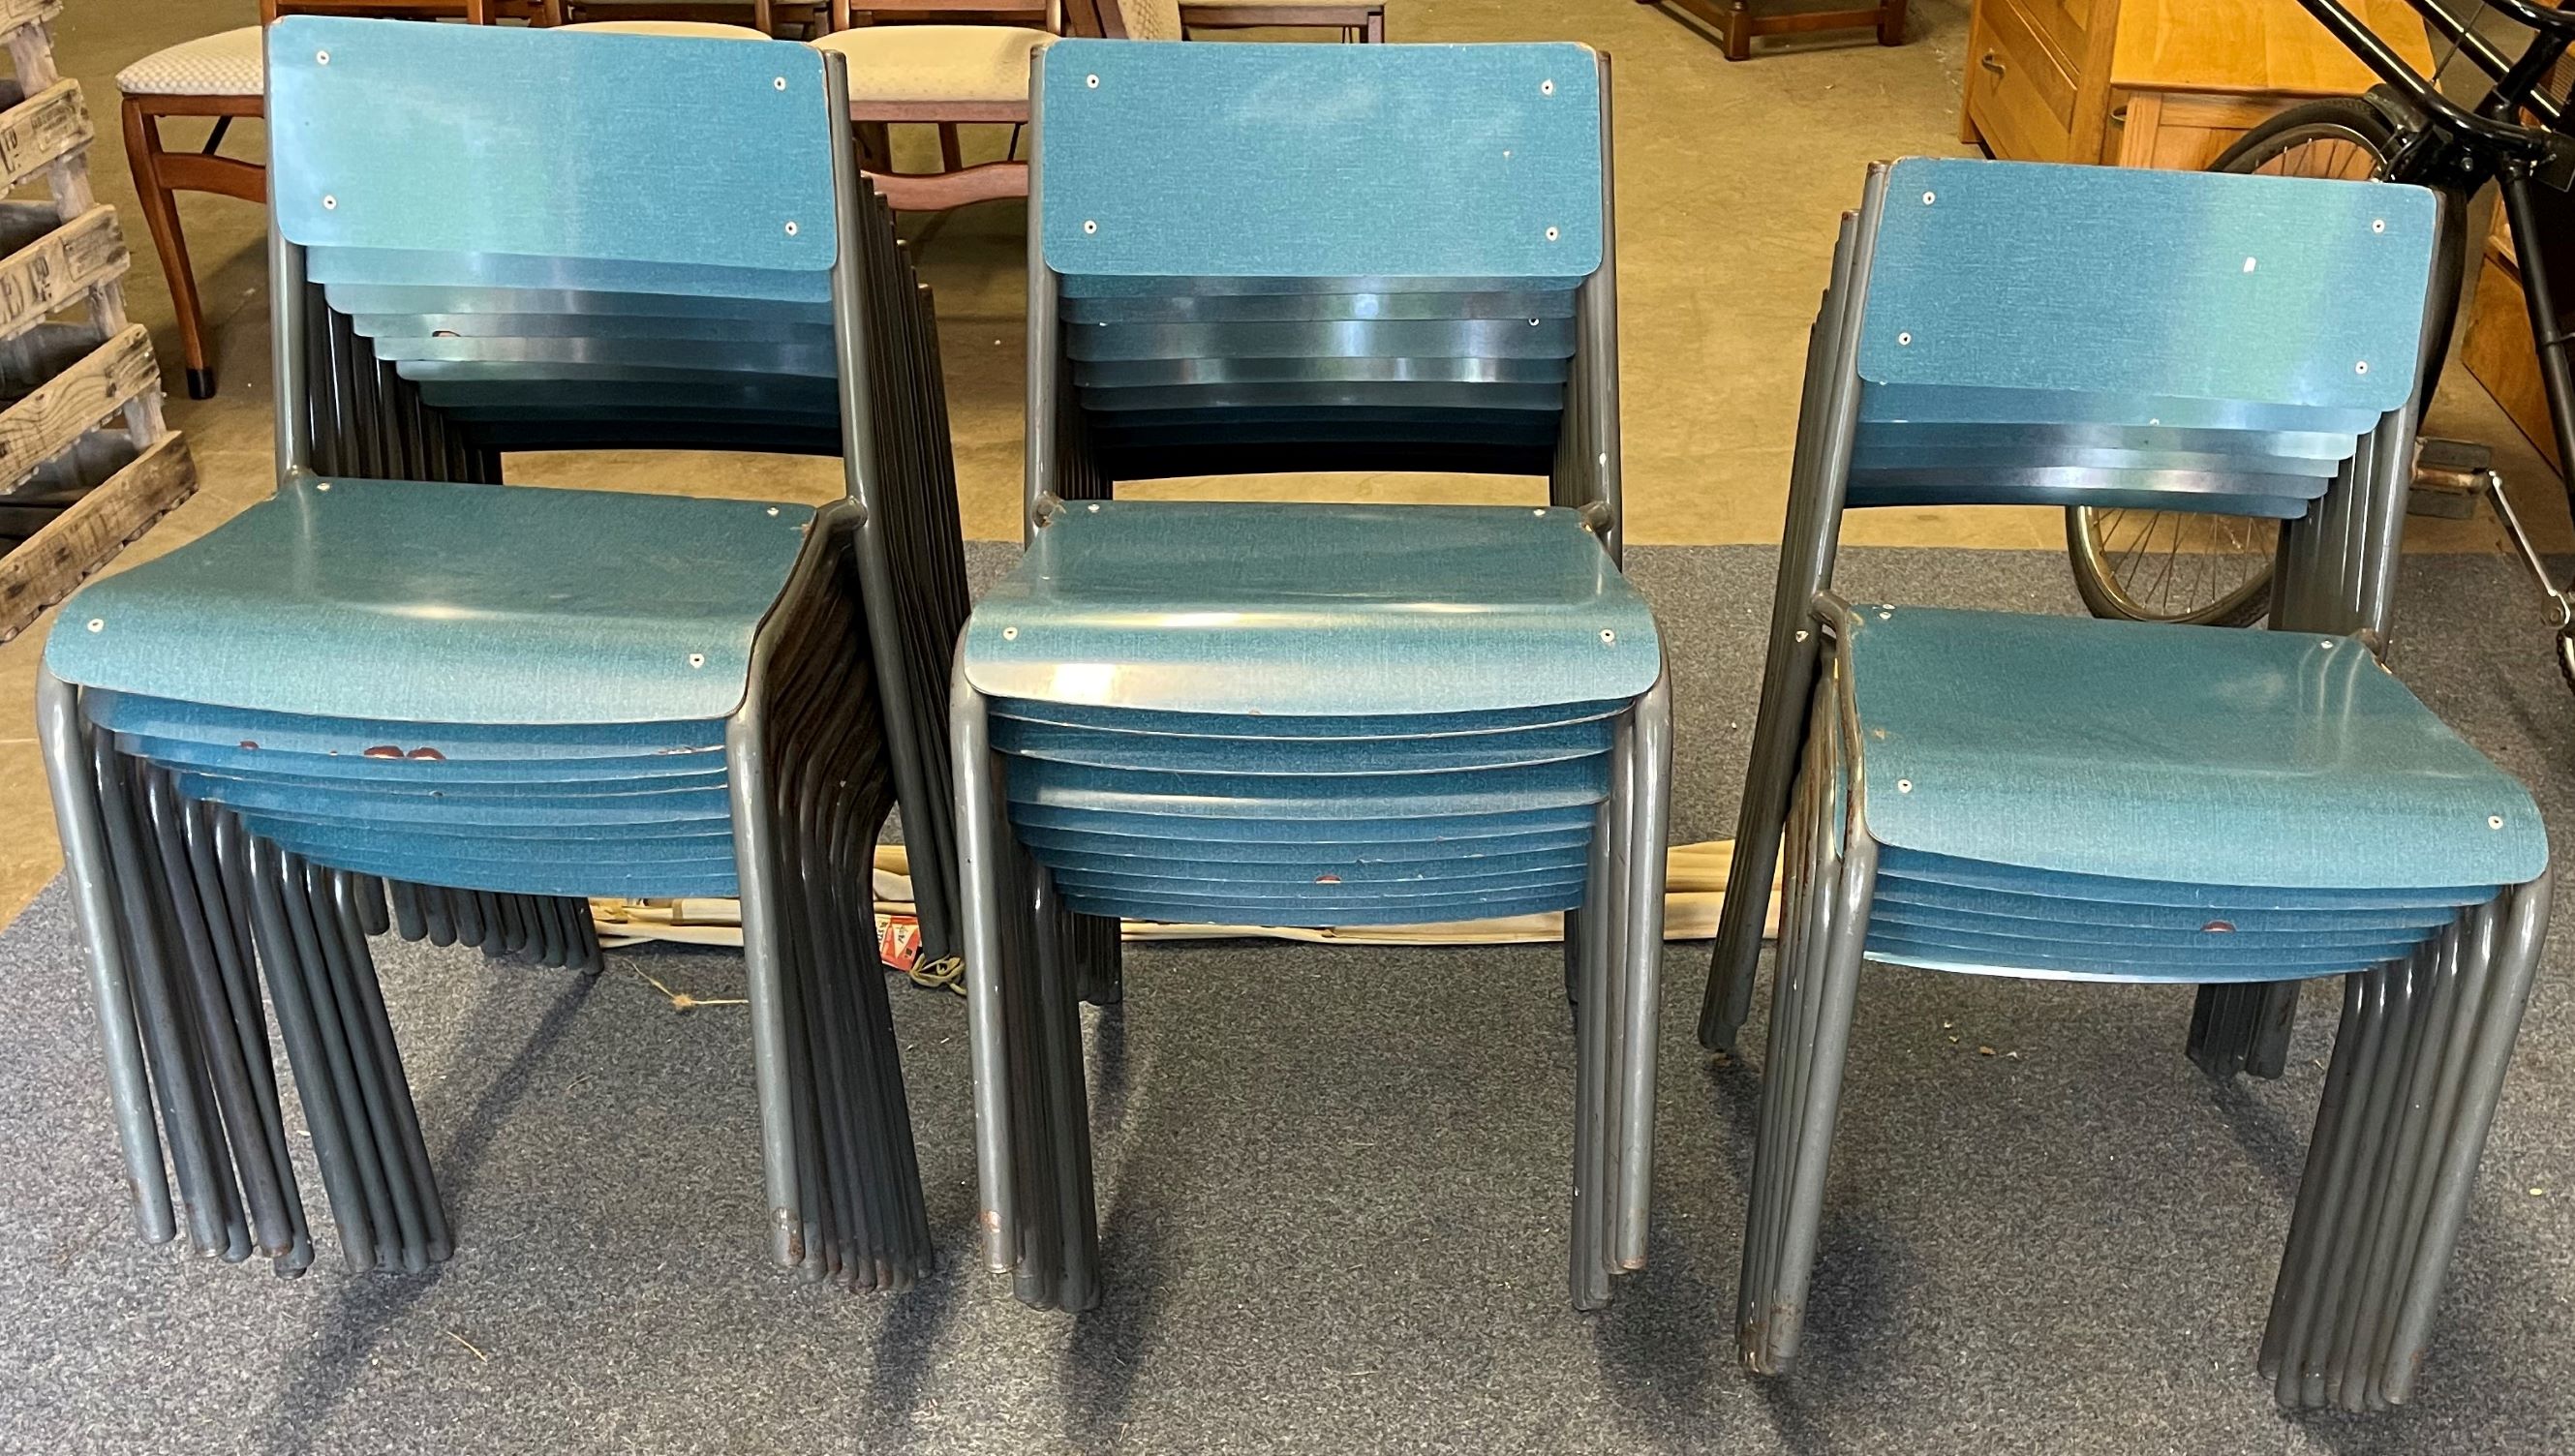 27 vintage metal frame stacking chairs & an old camp bed missing legs